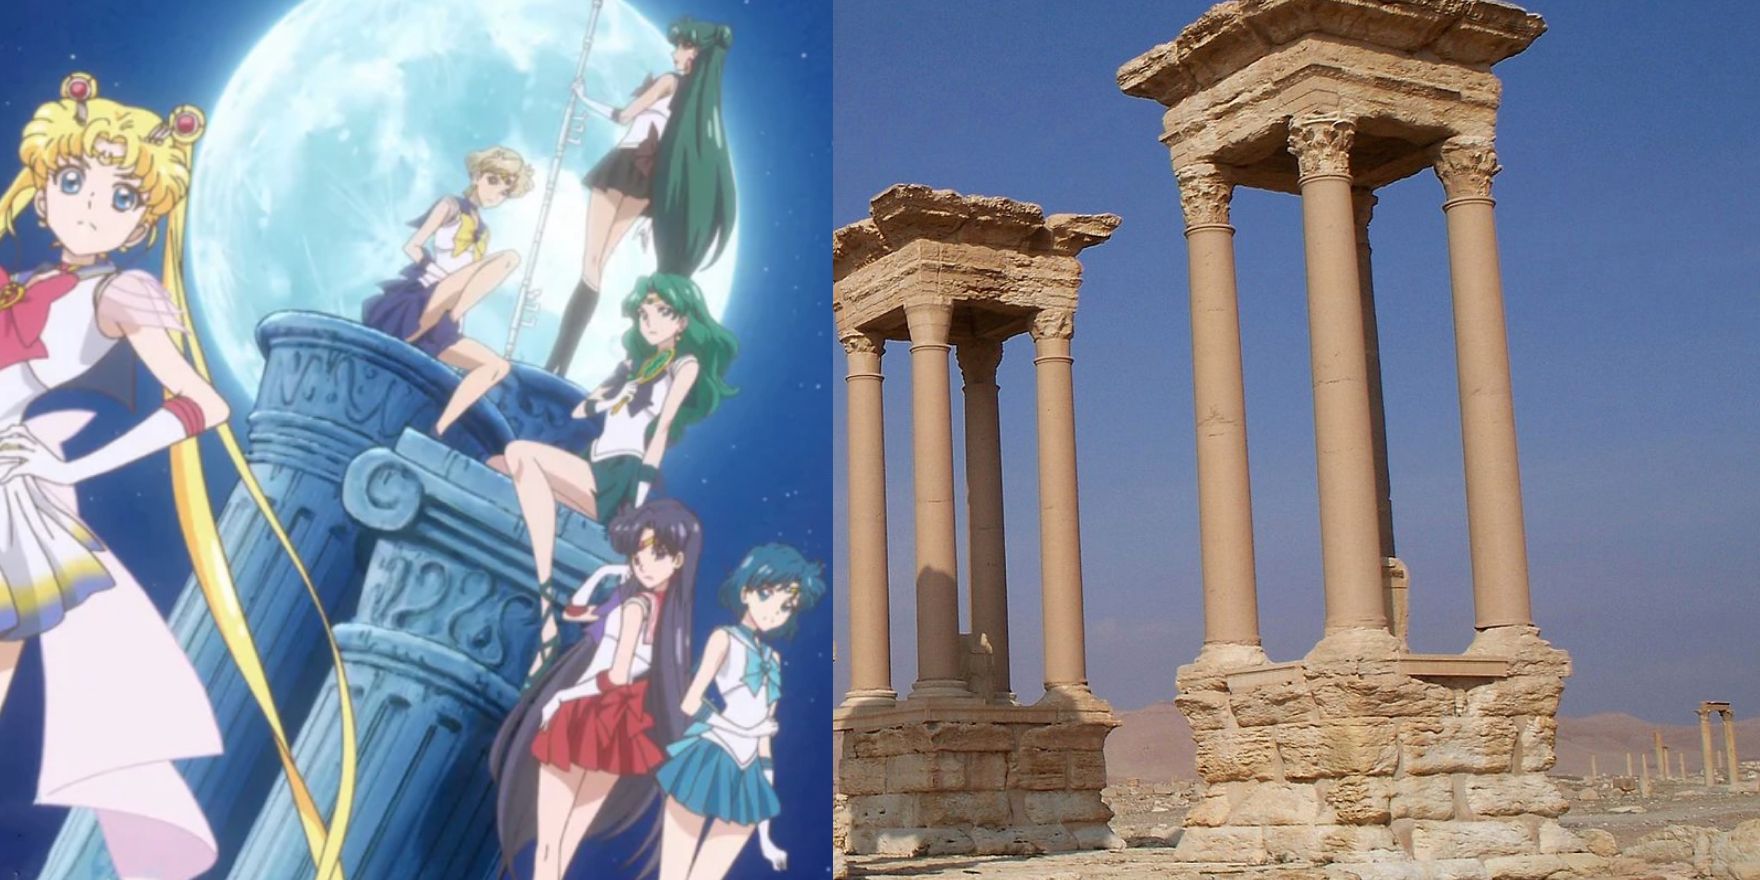 Elysion in Sailor Moon and the ruins in Palmyra, Syria split image.